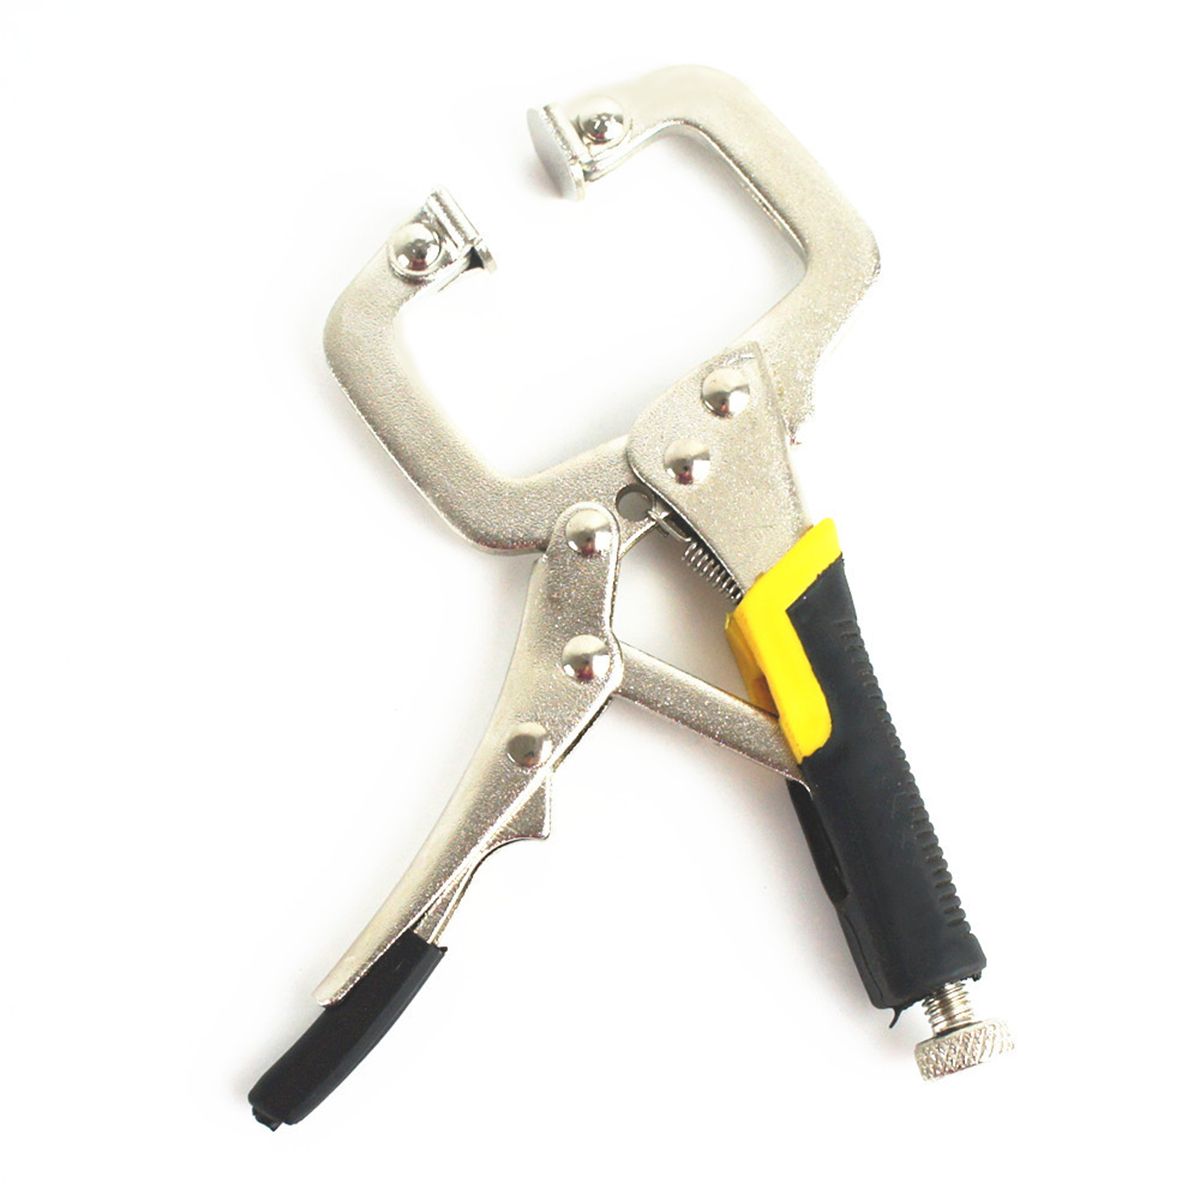 3-Piece-Mini-Vice-Grip-Kit-Complete-Locking-C-Clamp-Straight-Nose-and-Needle-Long-Nose-Pliers-set-1559062